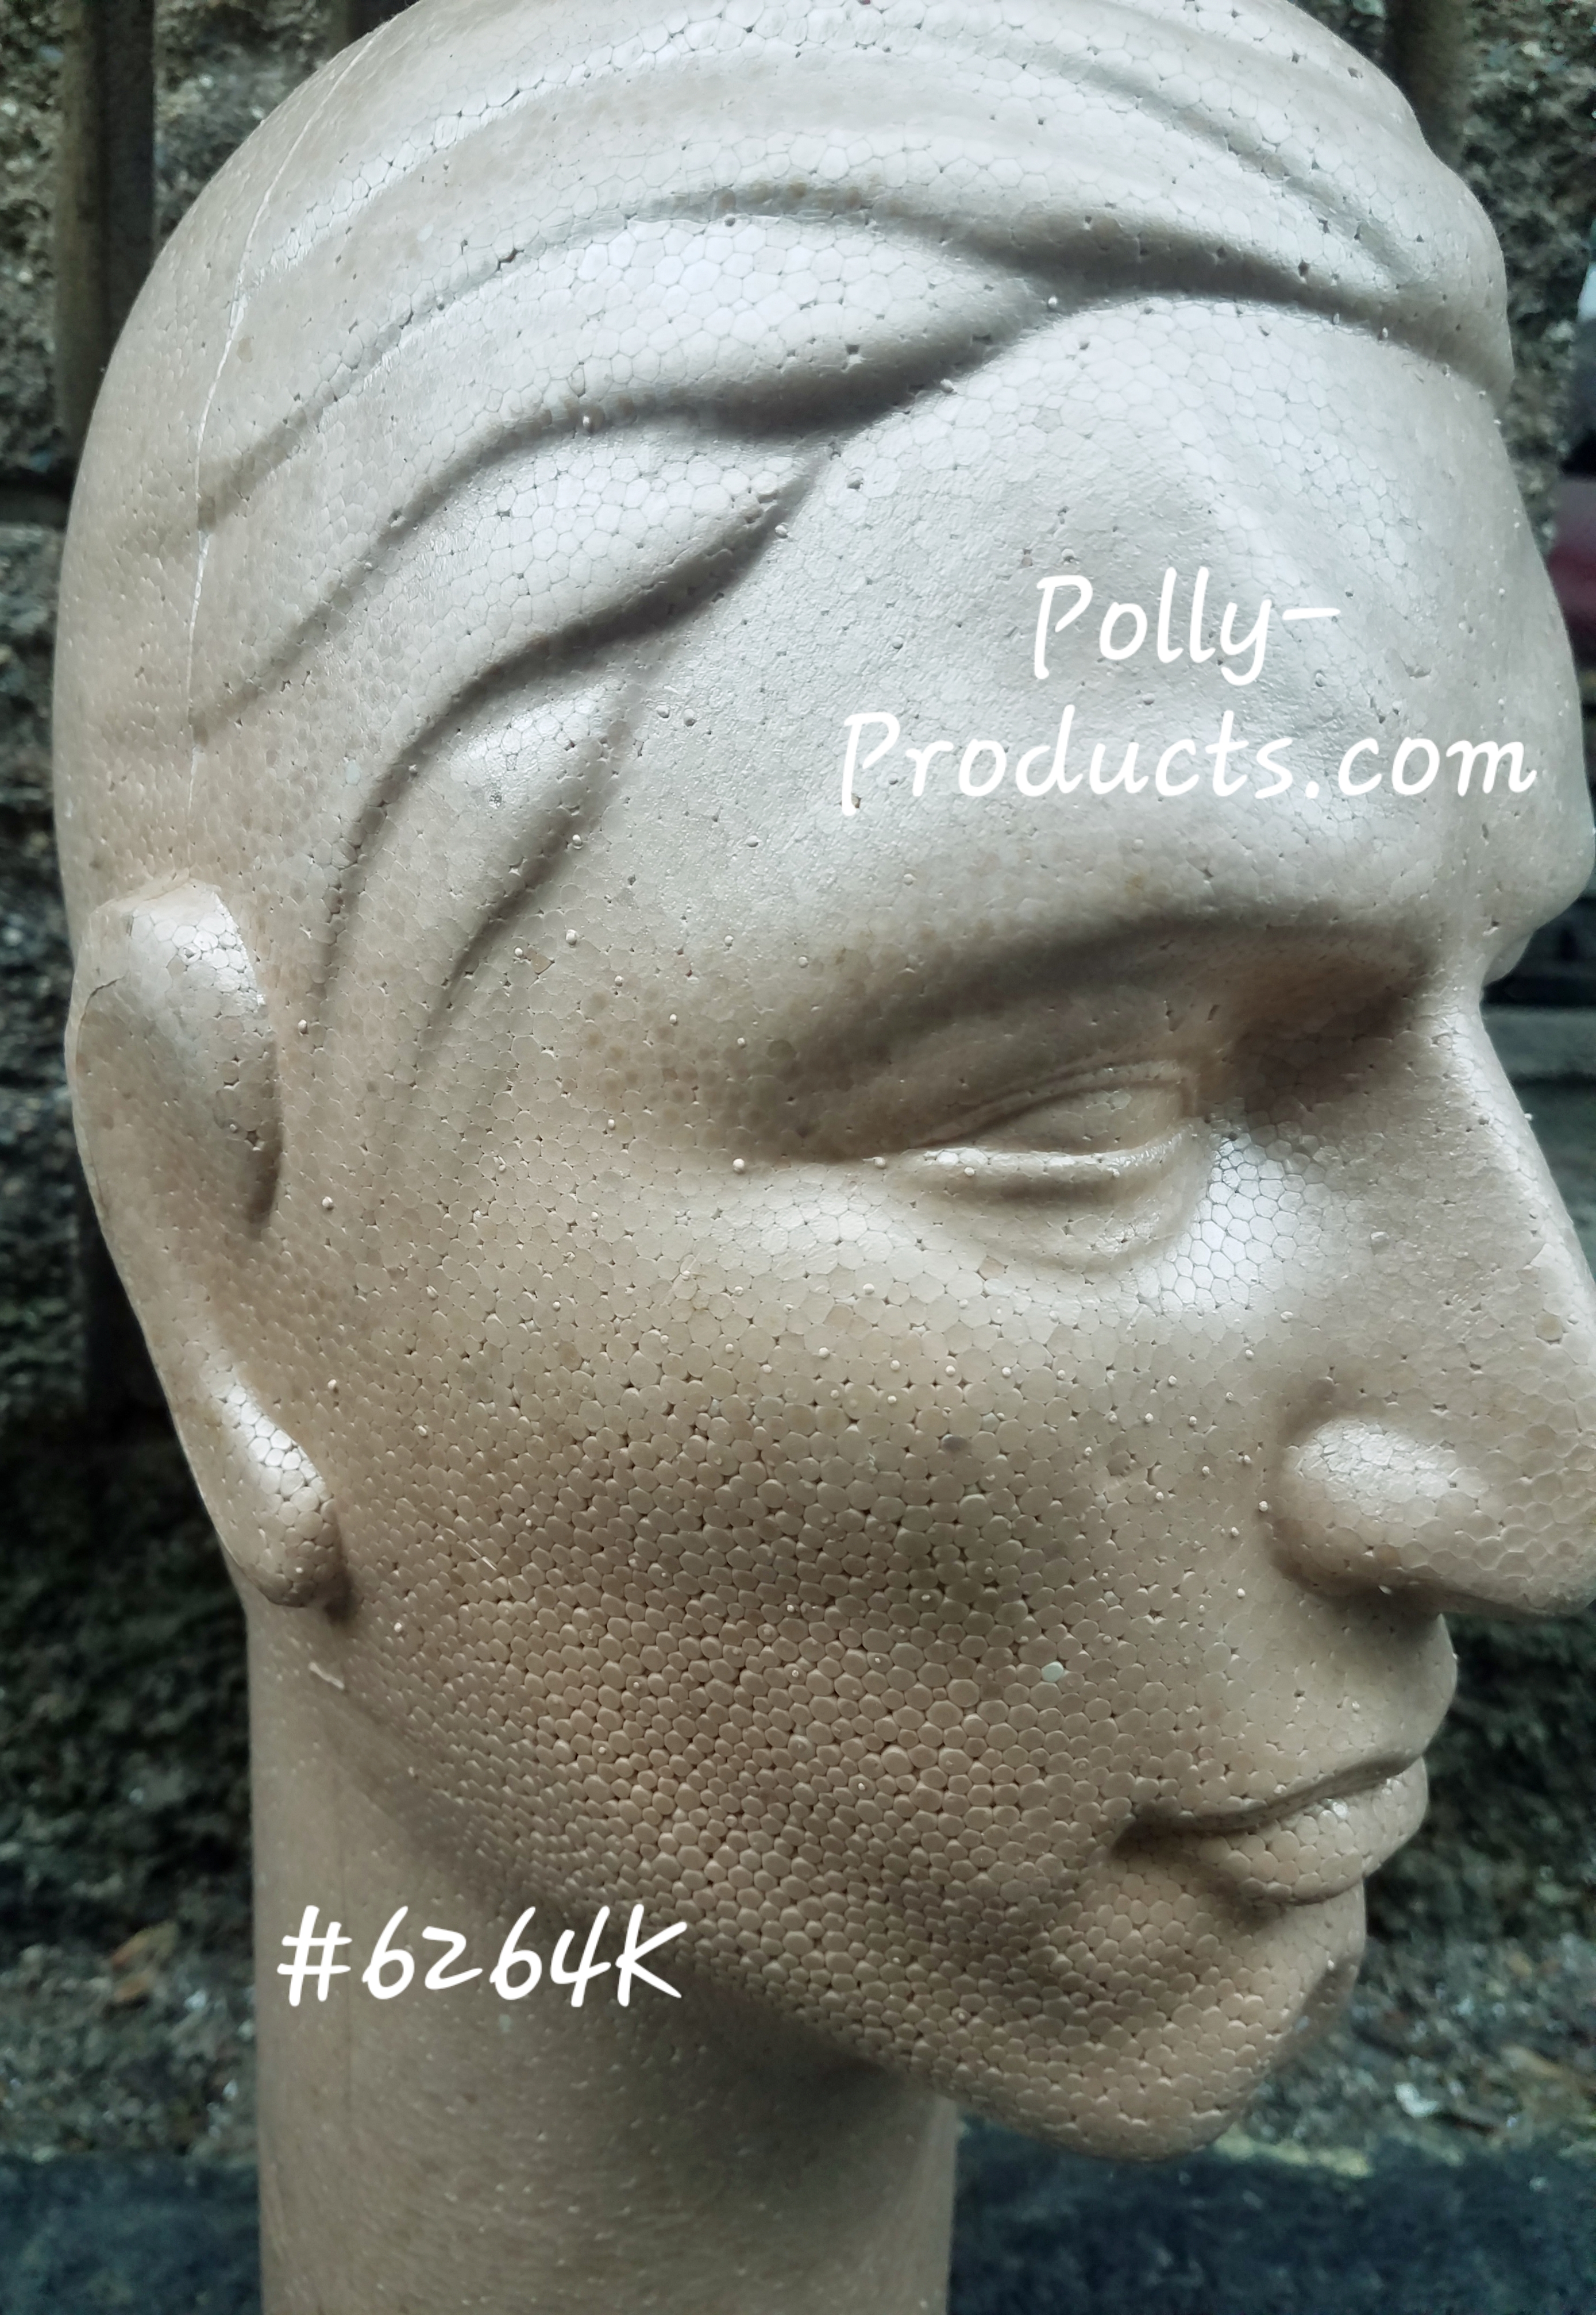 #6264K 16"H MALE STYLIZED MANNEQUIN HEAD- KRAFT / LIGHT TAN BY POLLY PRODUCTS